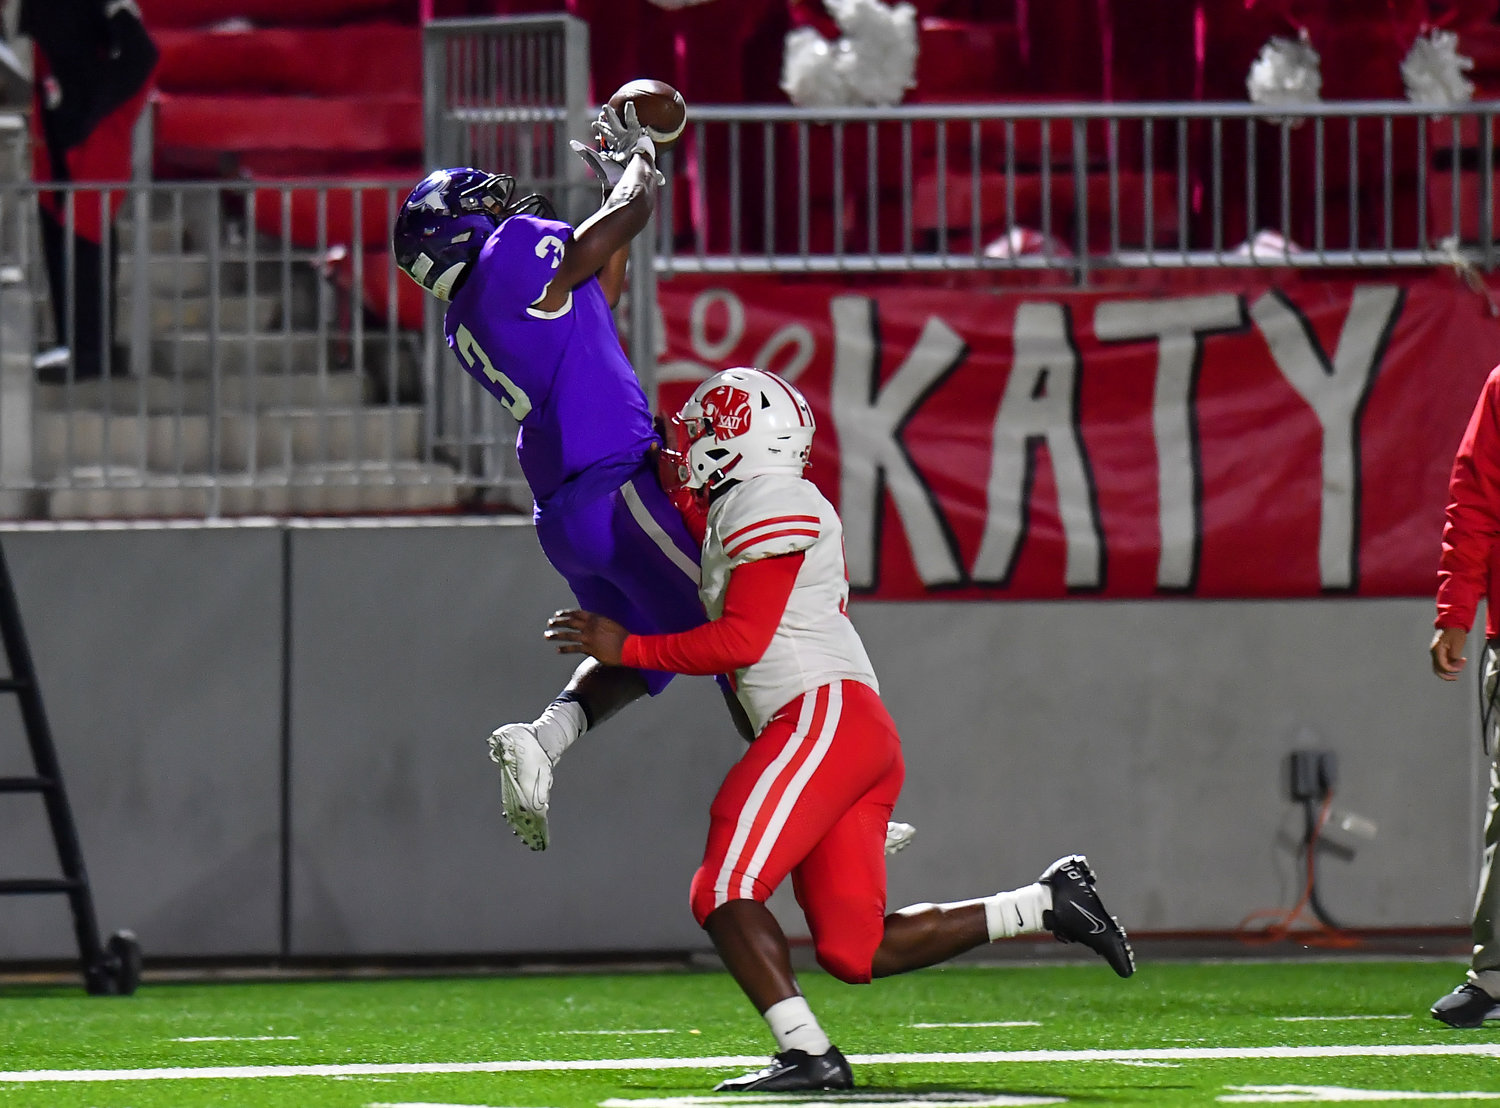 Katy, Tx. Nov 5, 2021: Morton Ranch's Santana Scott #3 goes up for the reception during a conference game between Katy and Morton Ranch at Legacy Stadium in Katy. (Photo by Mark Goodman / Katy Times)